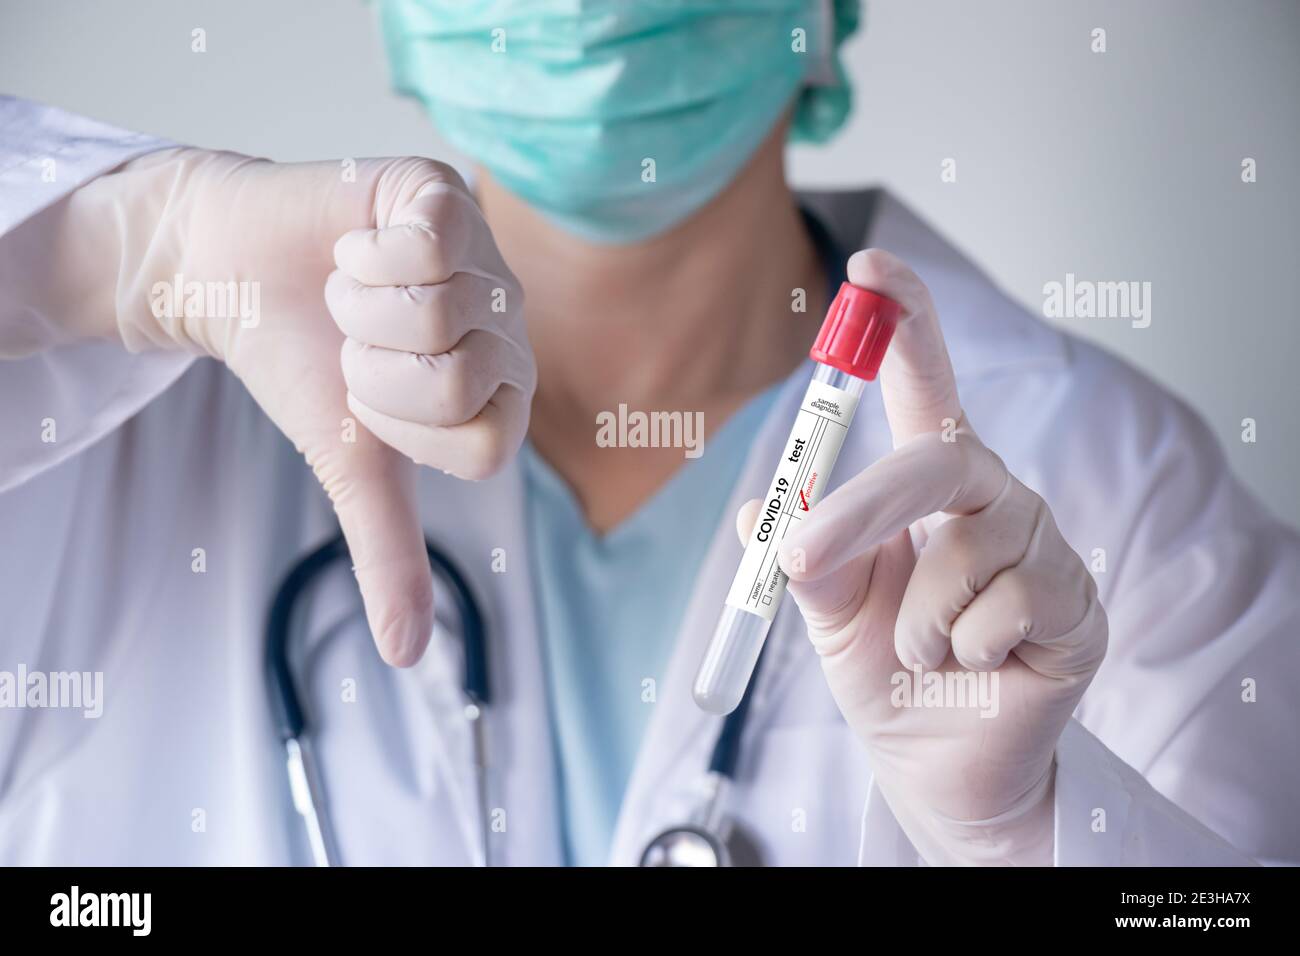 coronavirus COVID-19 test. doctor hand holding infection test tube for patient nasal secretion sample, positive result label and thumb down gesture Stock Photo